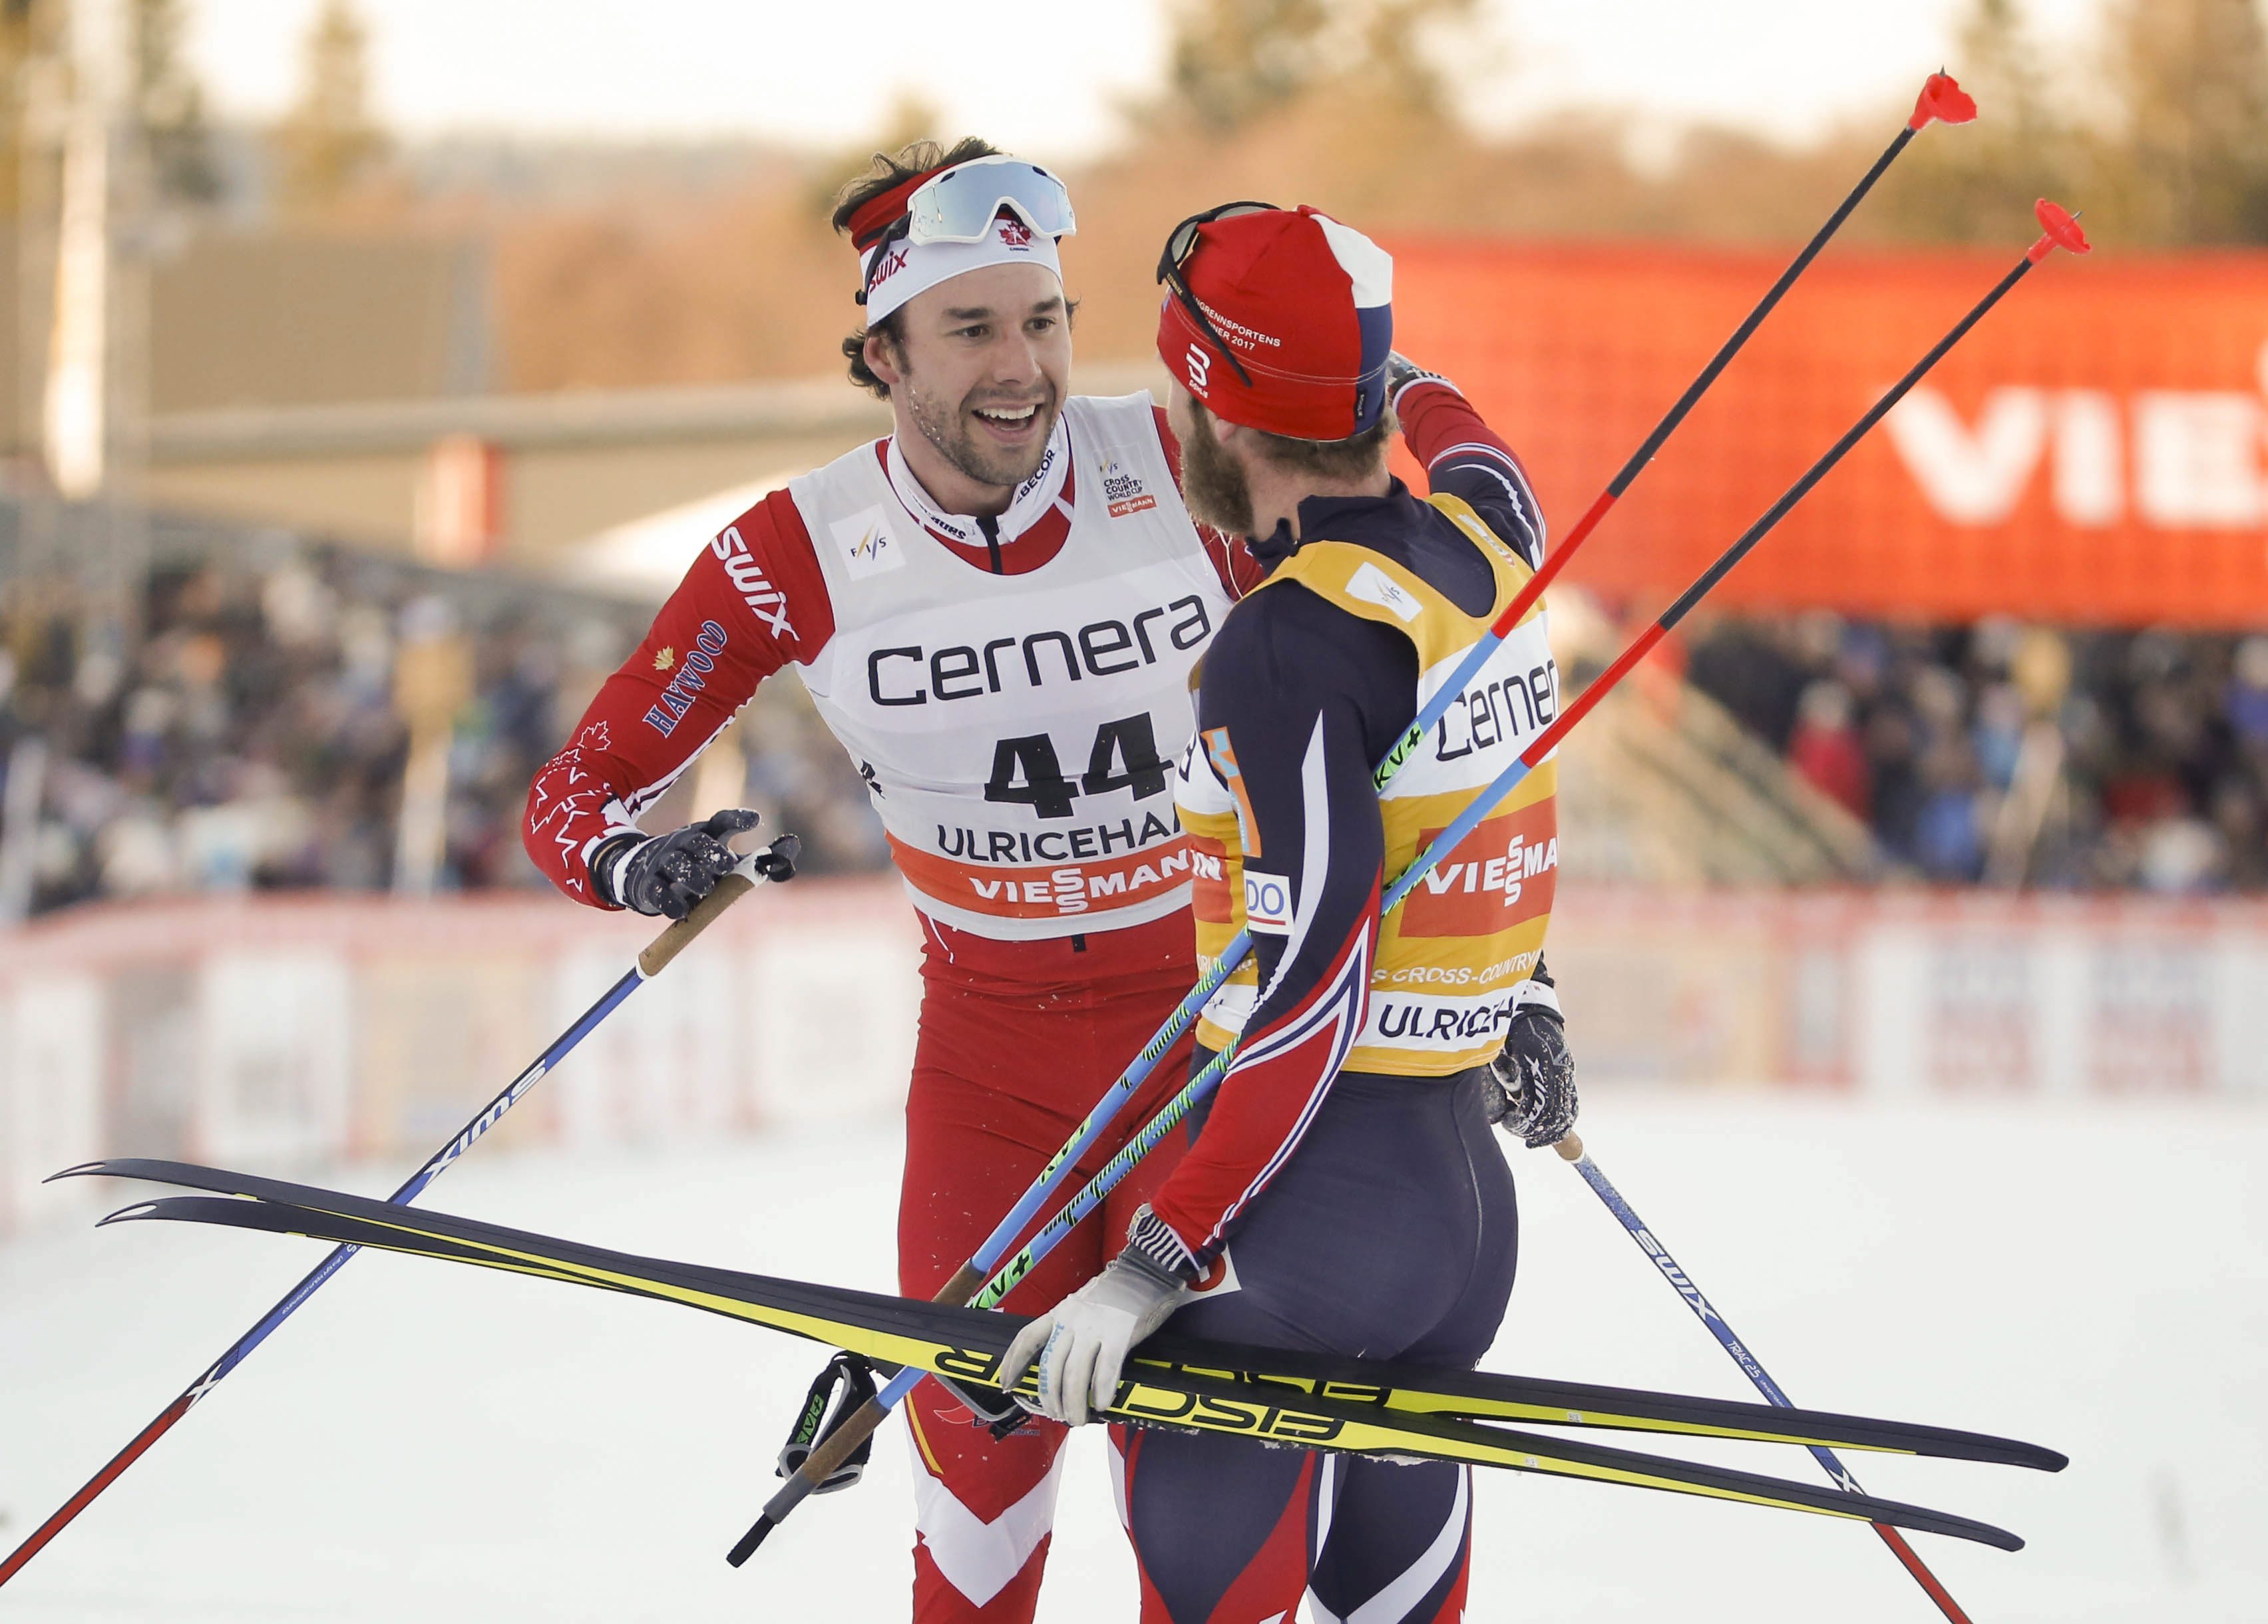 Alex Harvey of Canada, left, is congratulated by Norway's Martin Johnsrud Sundby after winning the men's 15km free style competition at the FIS Cross Country skiing World Cup event in Ulricehamn, Sweden, Saturday Jan. 21, 2017. (Adam Ihse / TT via AP)